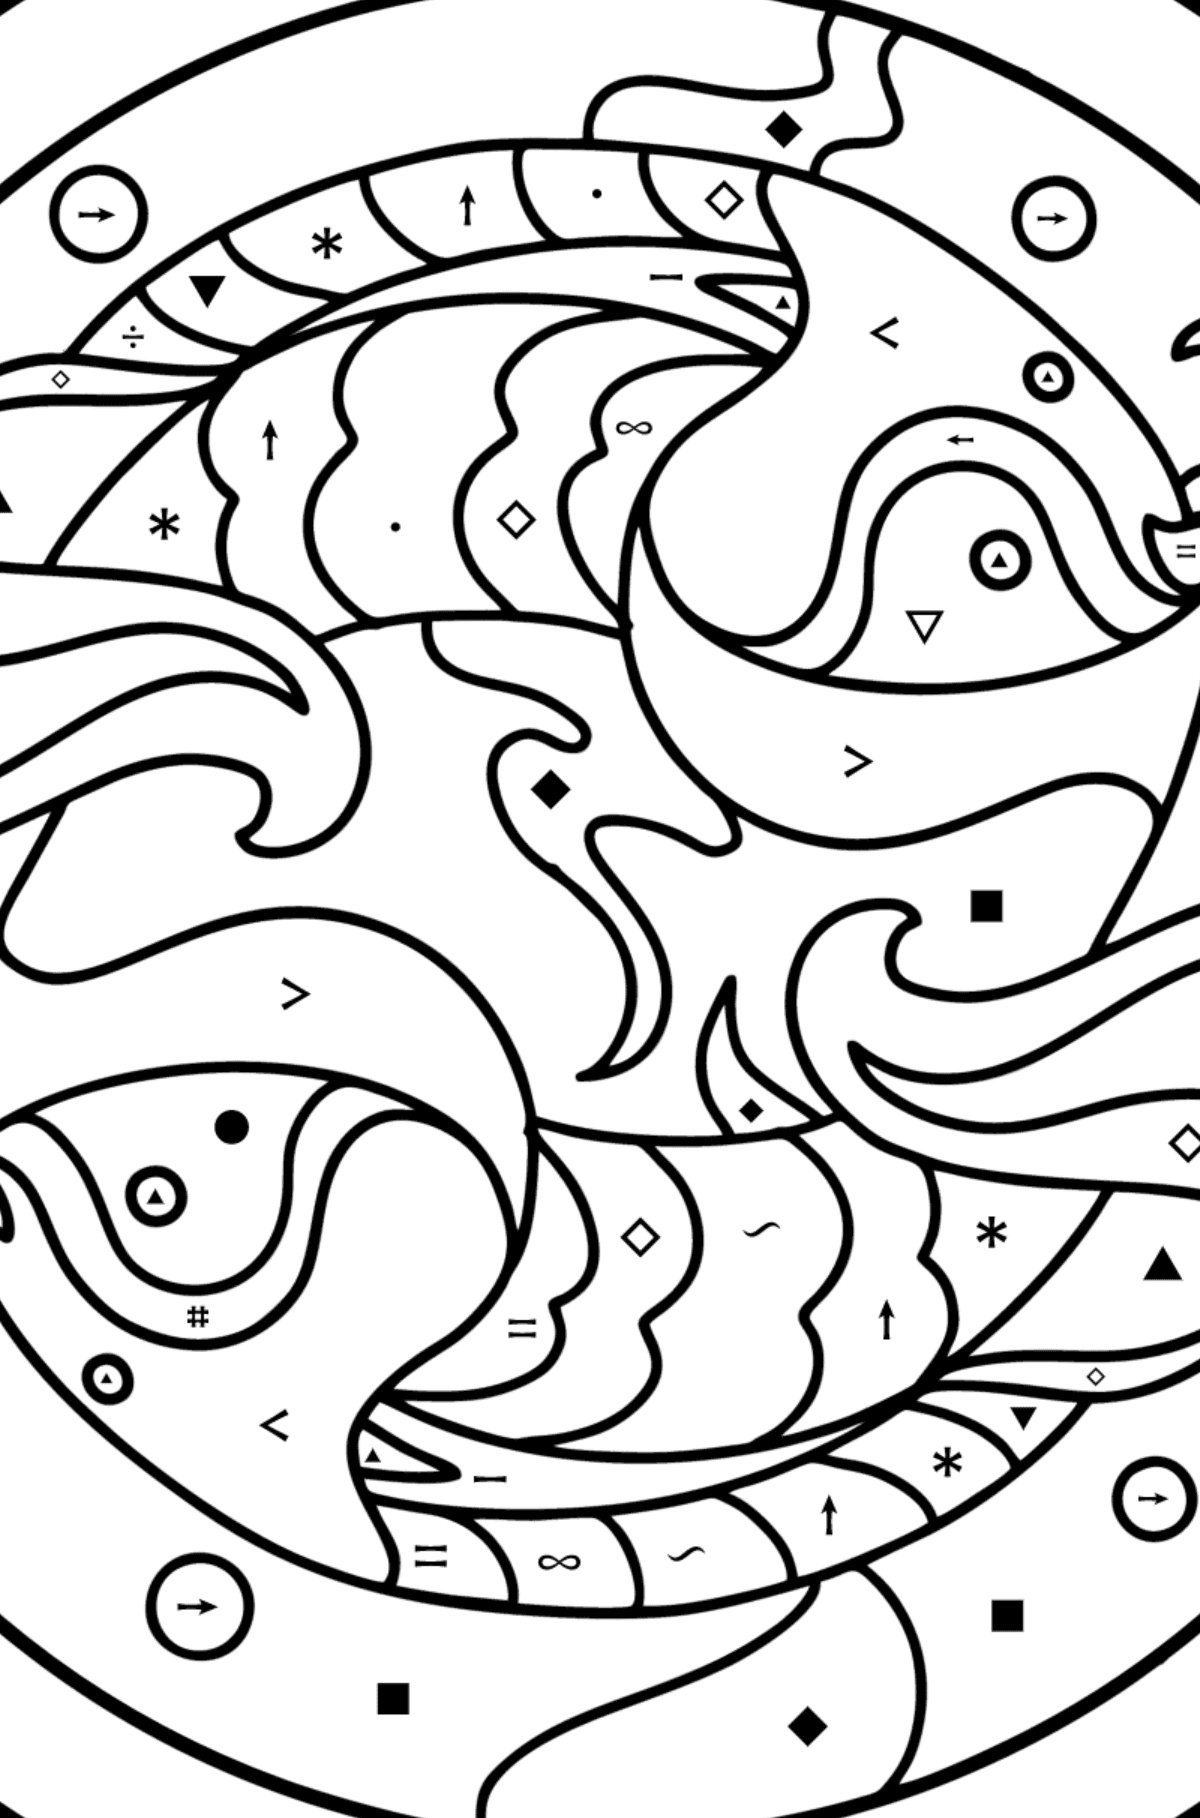 Coloring page for kids - zodiac sign Pisces - Coloring by Symbols for Kids